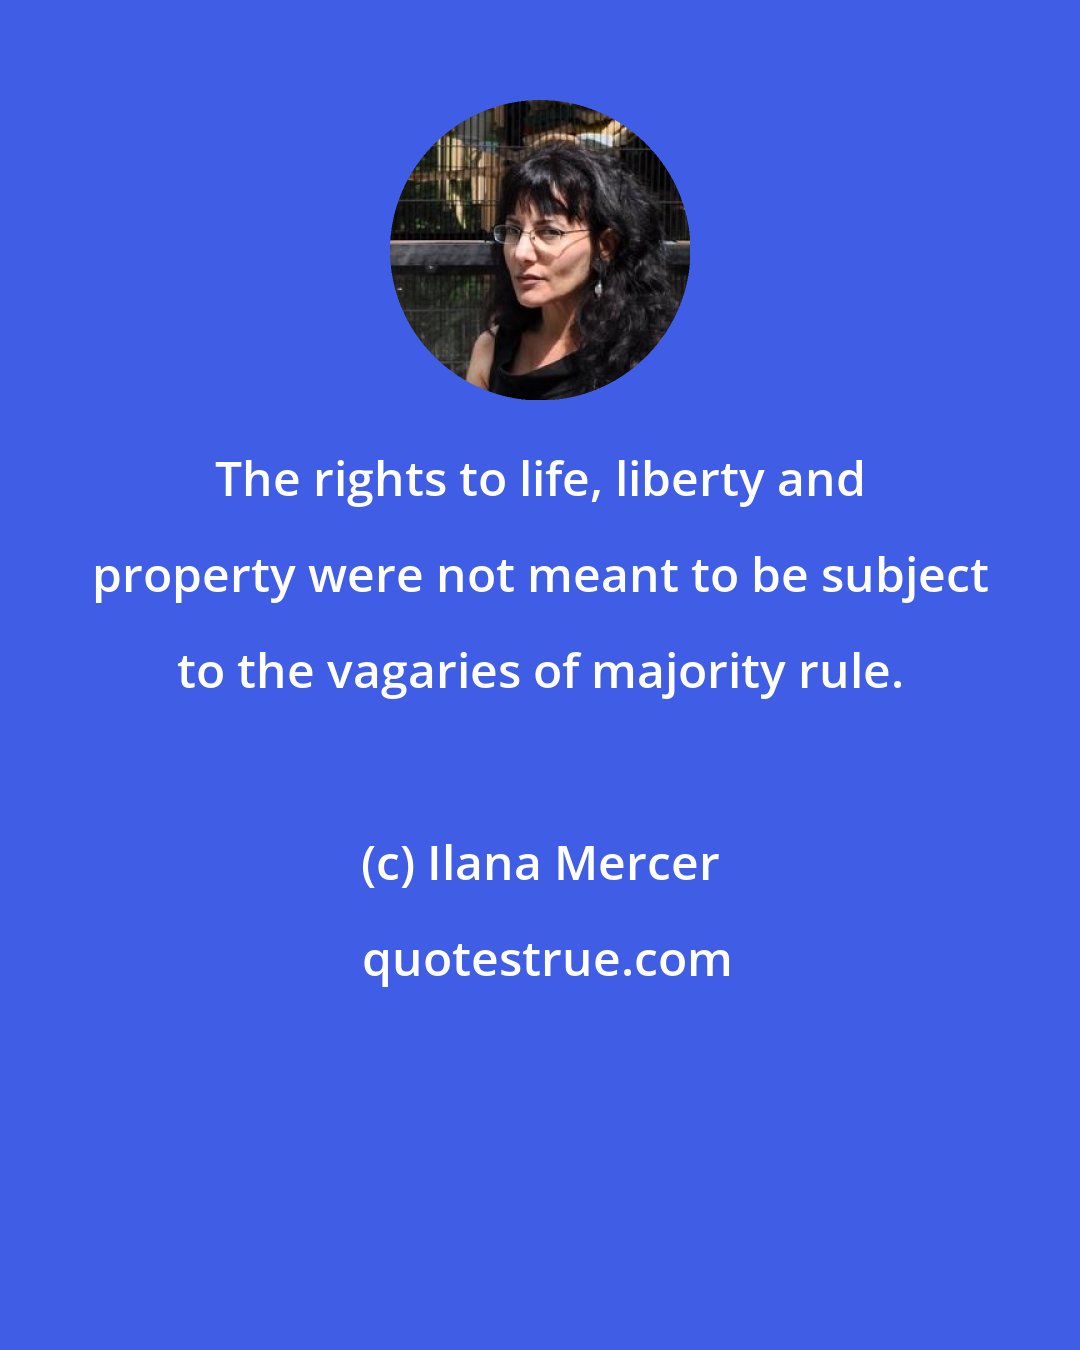 Ilana Mercer: The rights to life, liberty and property were not meant to be subject to the vagaries of majority rule.